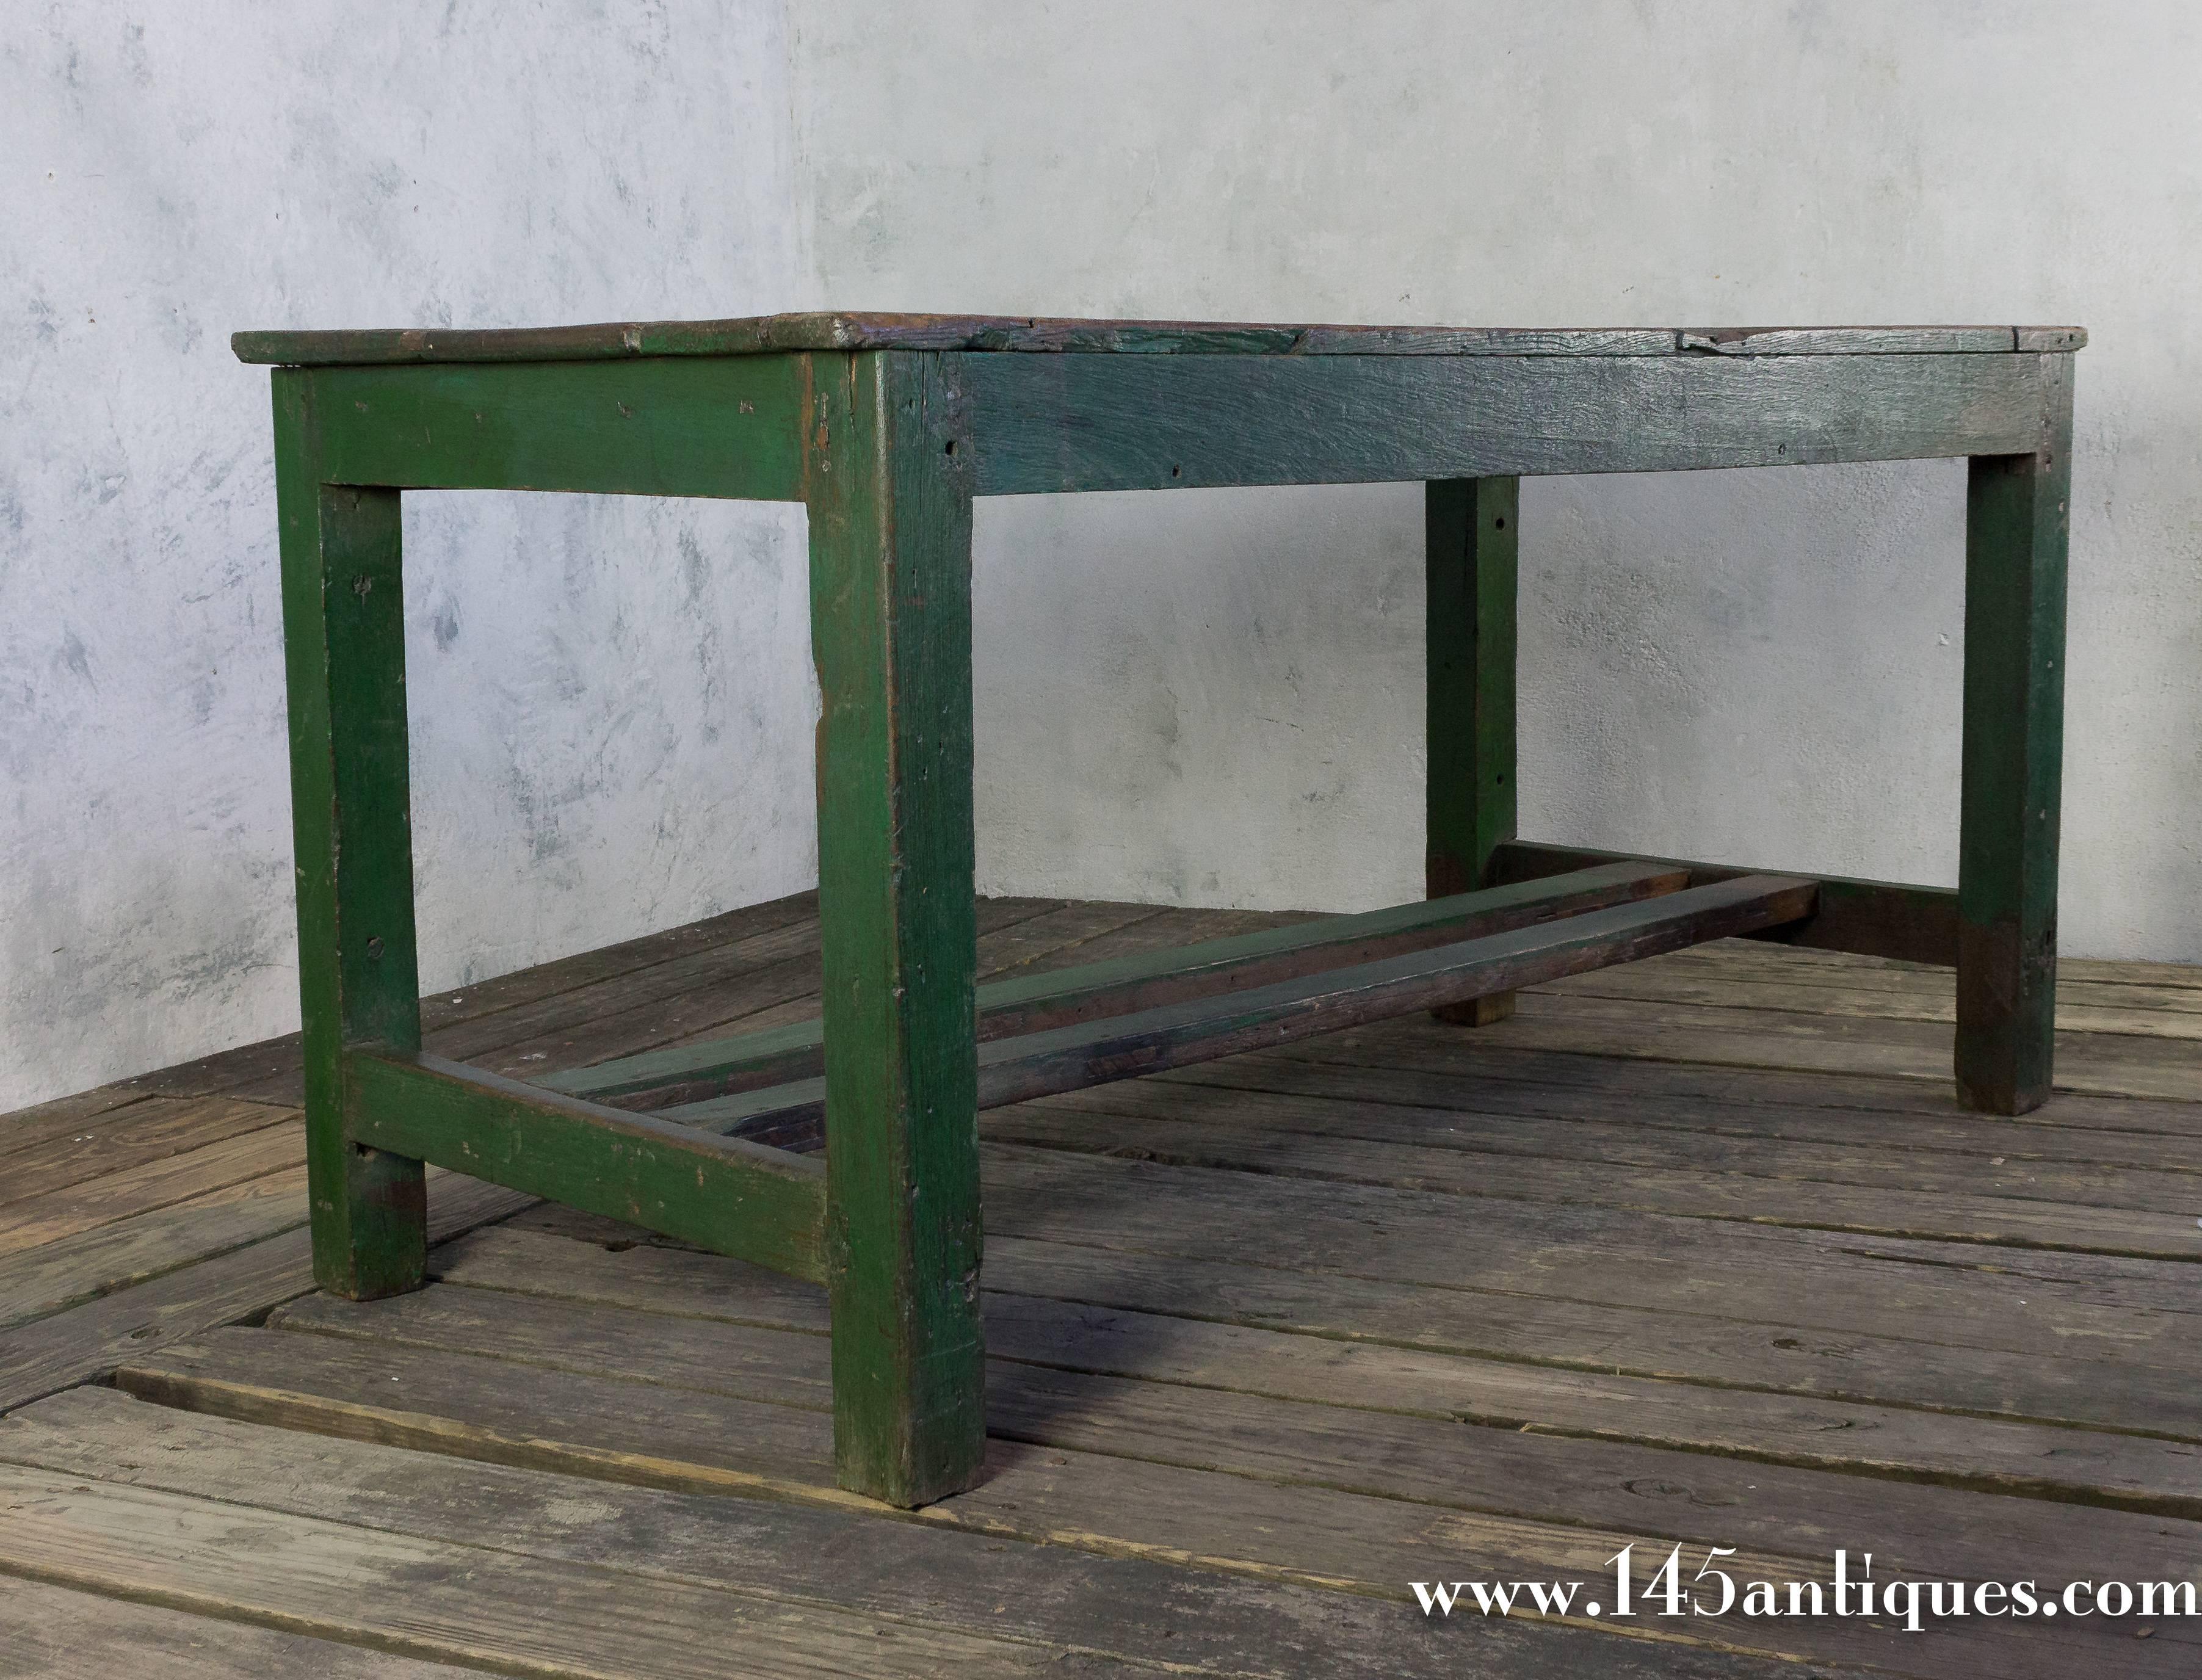 French Industrial wooden work table with old green paint patina on the legs and a natural wooden top, early 20th century.